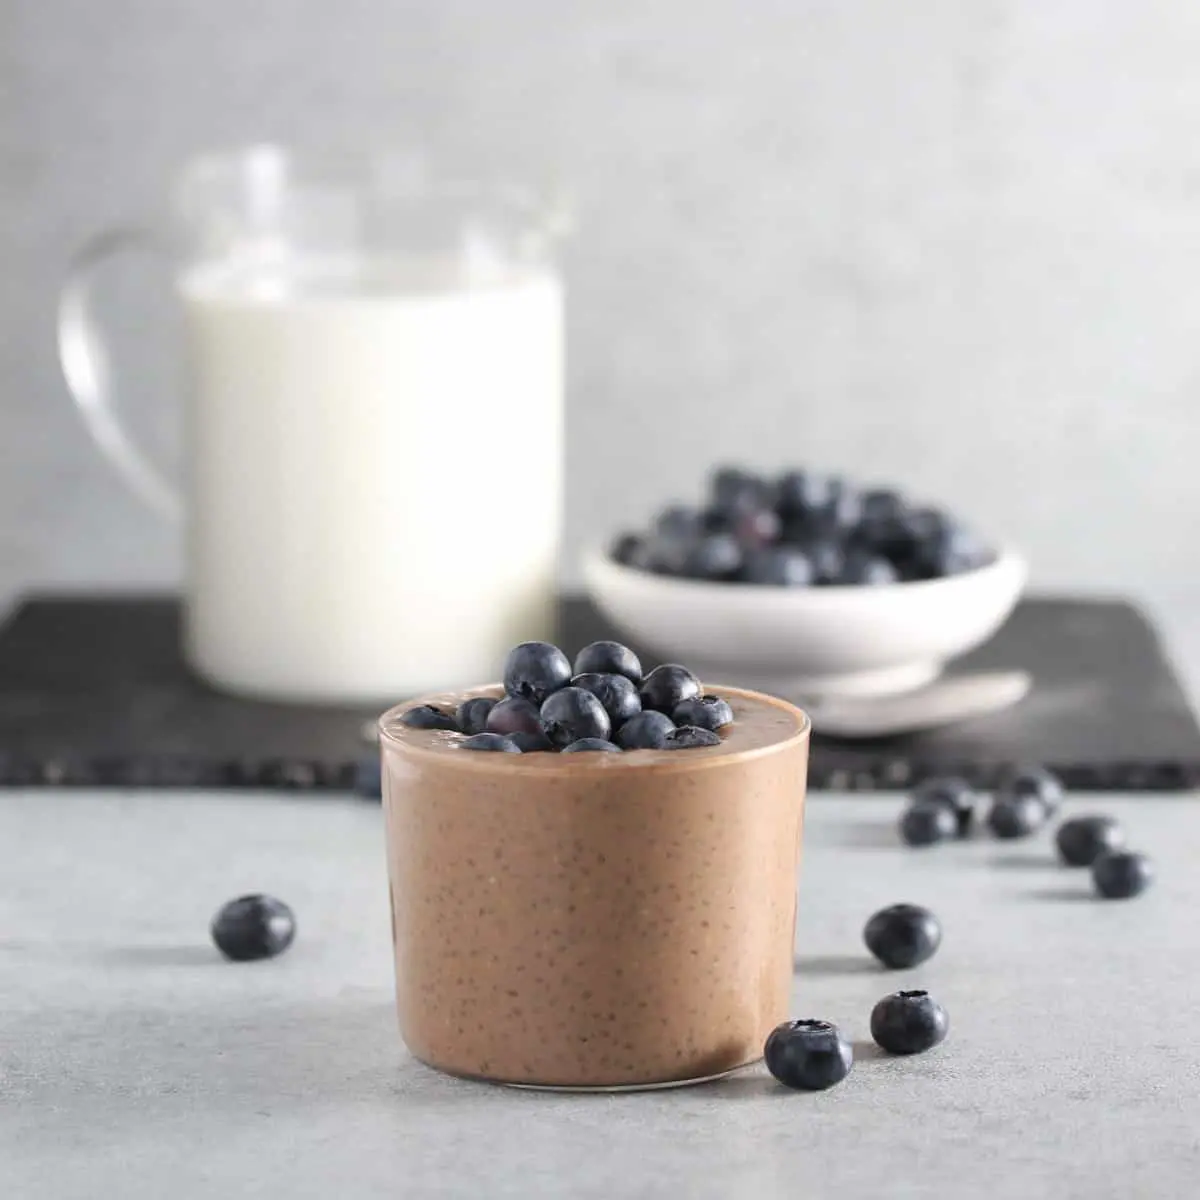 Make-Ahead Blueberry Chia Seed Breakfast Pudding